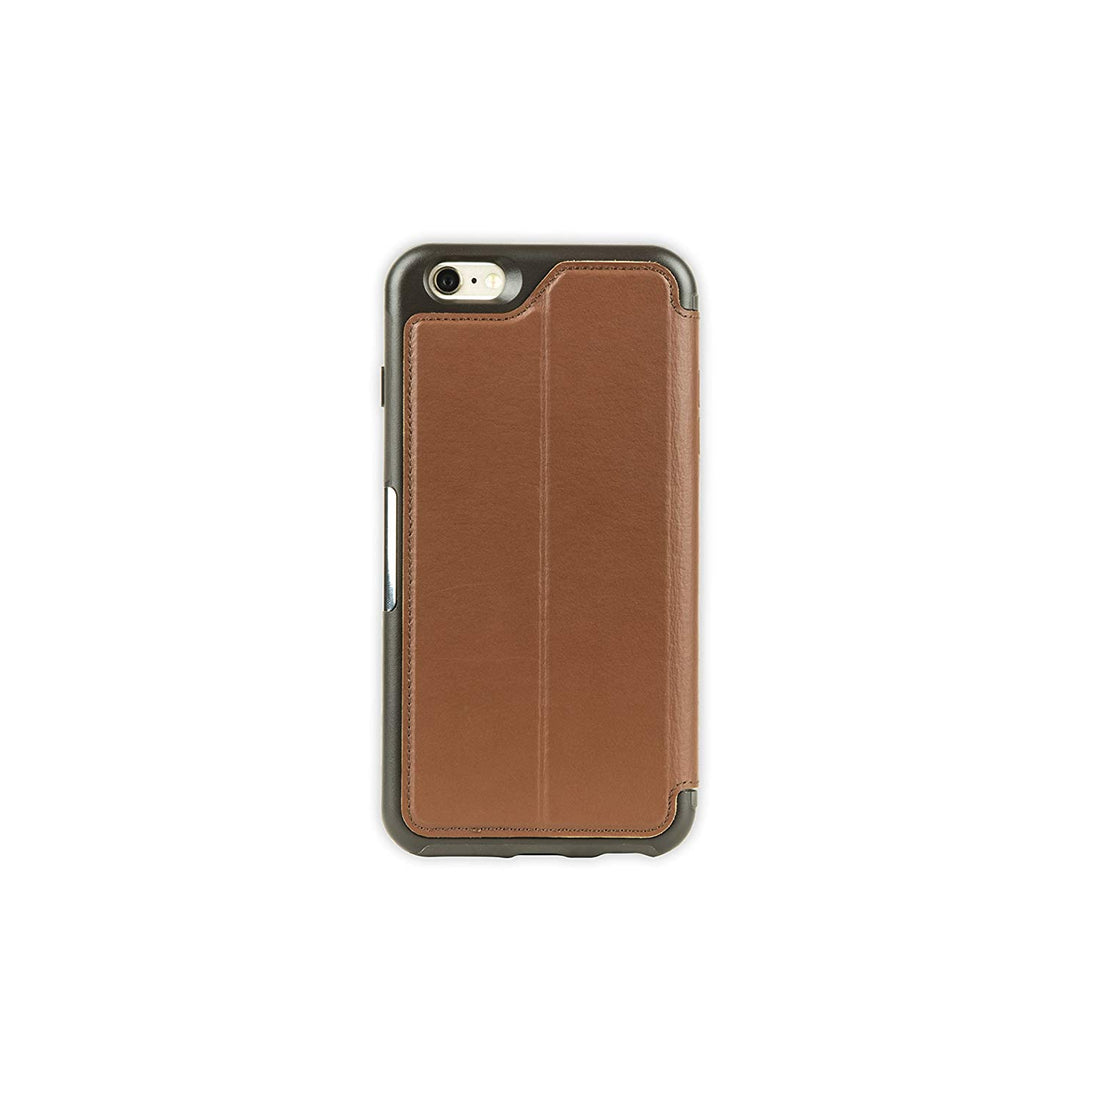 OtterBox STRADA SERIES Leather Wallet Case for Apple iPhone 6 Plus/6S Plus - Saddle (New)